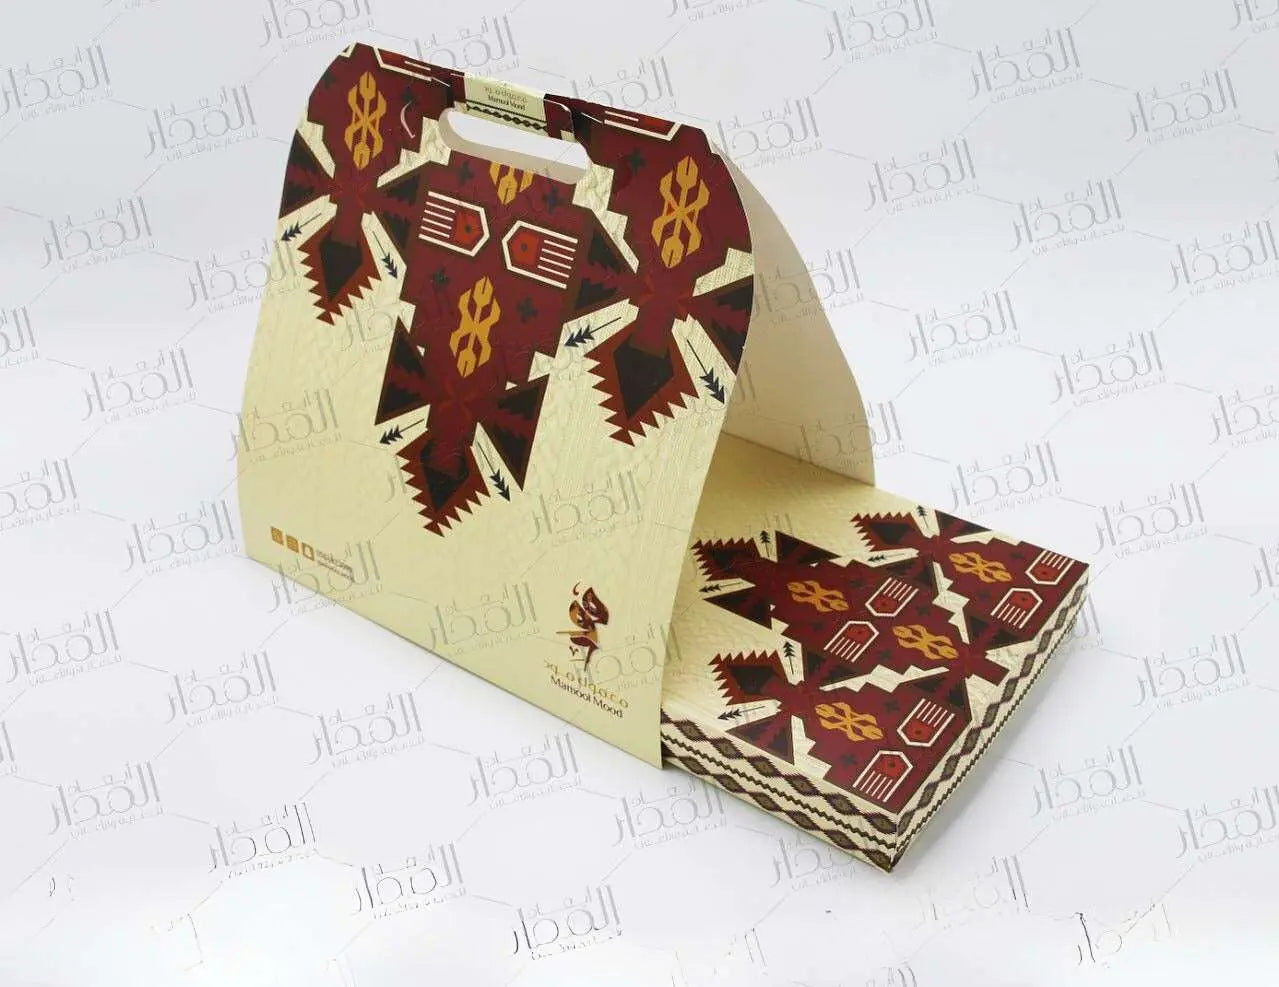 custom printed 29×19ç5×4 cm box with holder for chocolate and sweets